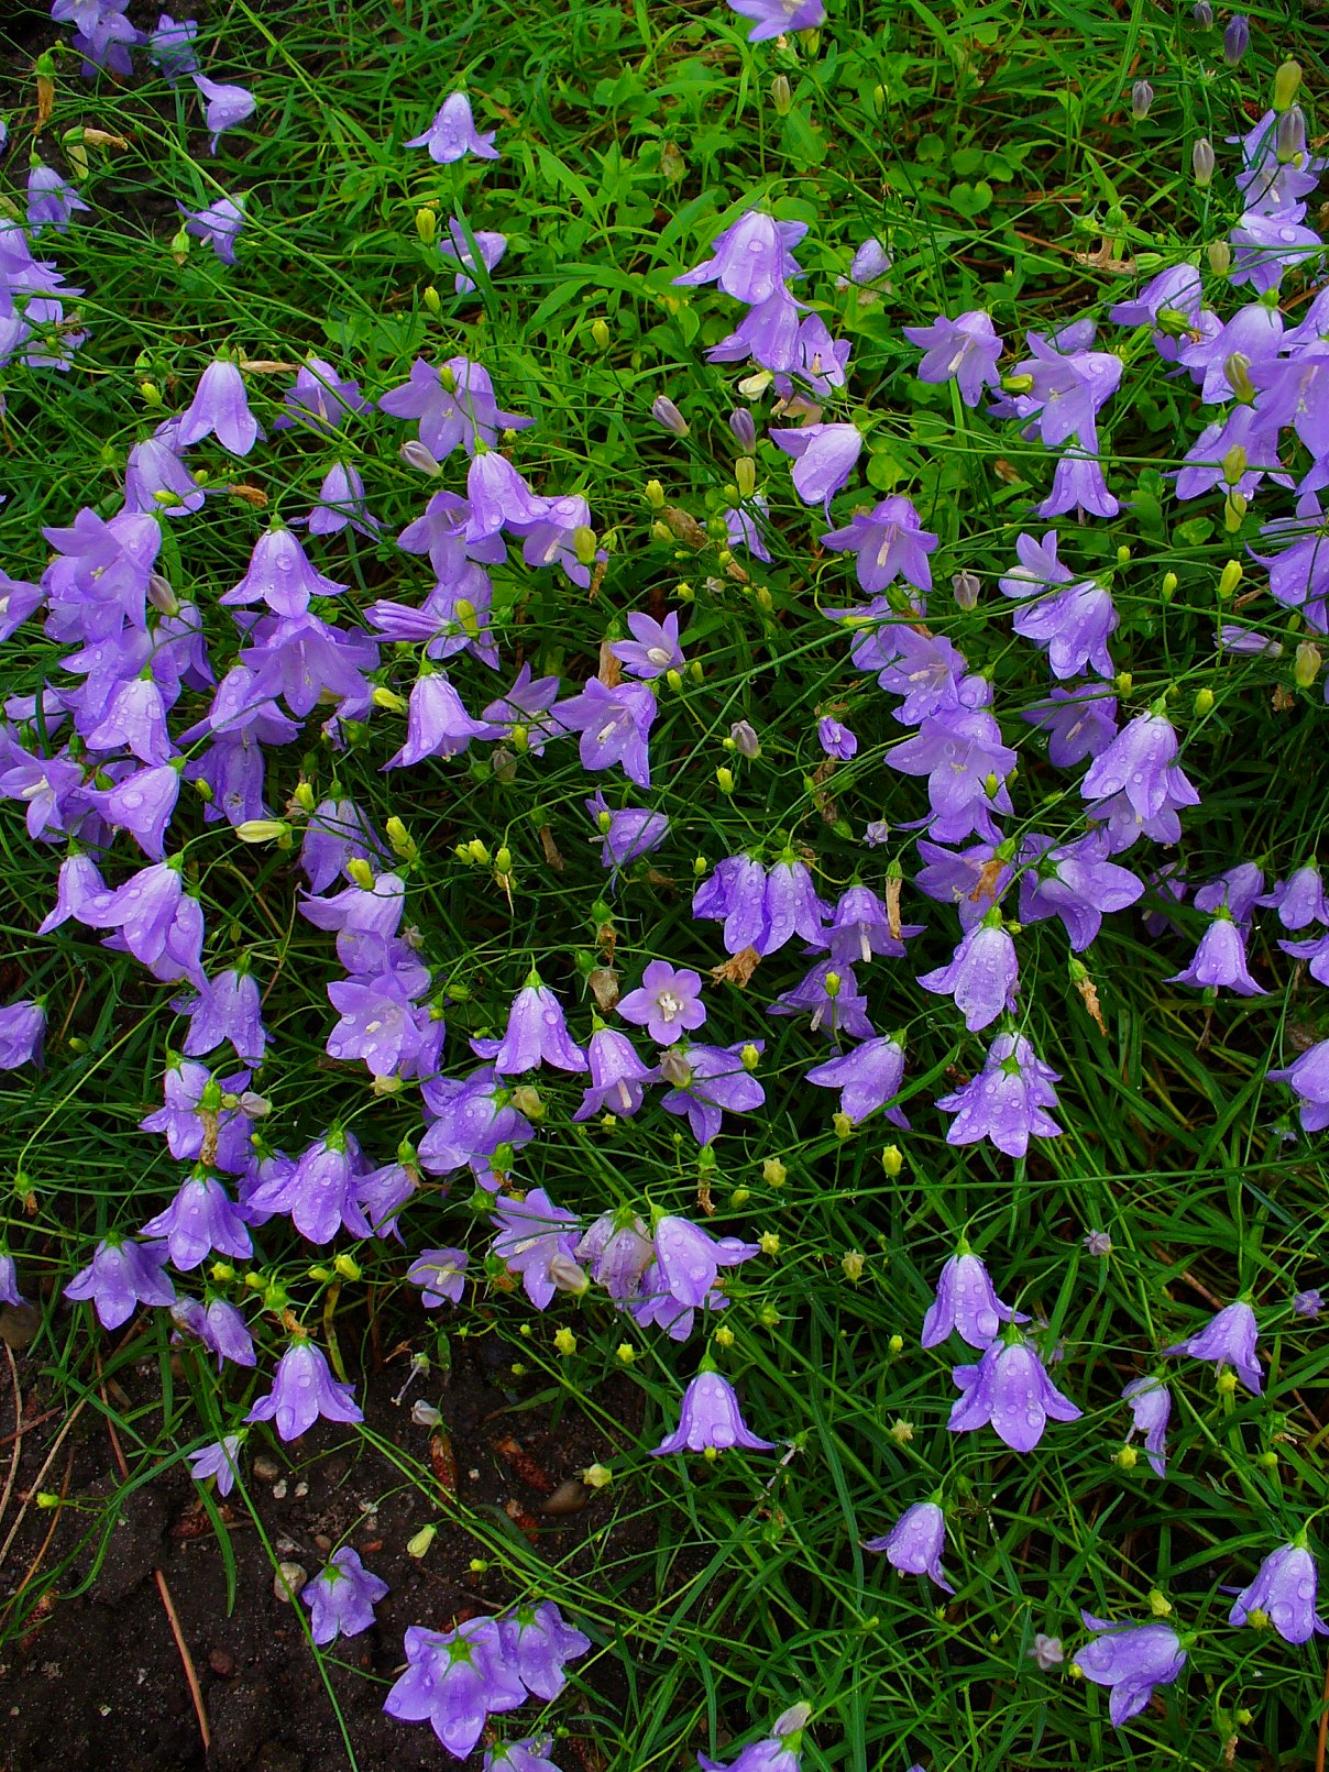 Violet flower with off-white stigma, lime-yellow buds, green sepals, stems and leaves.